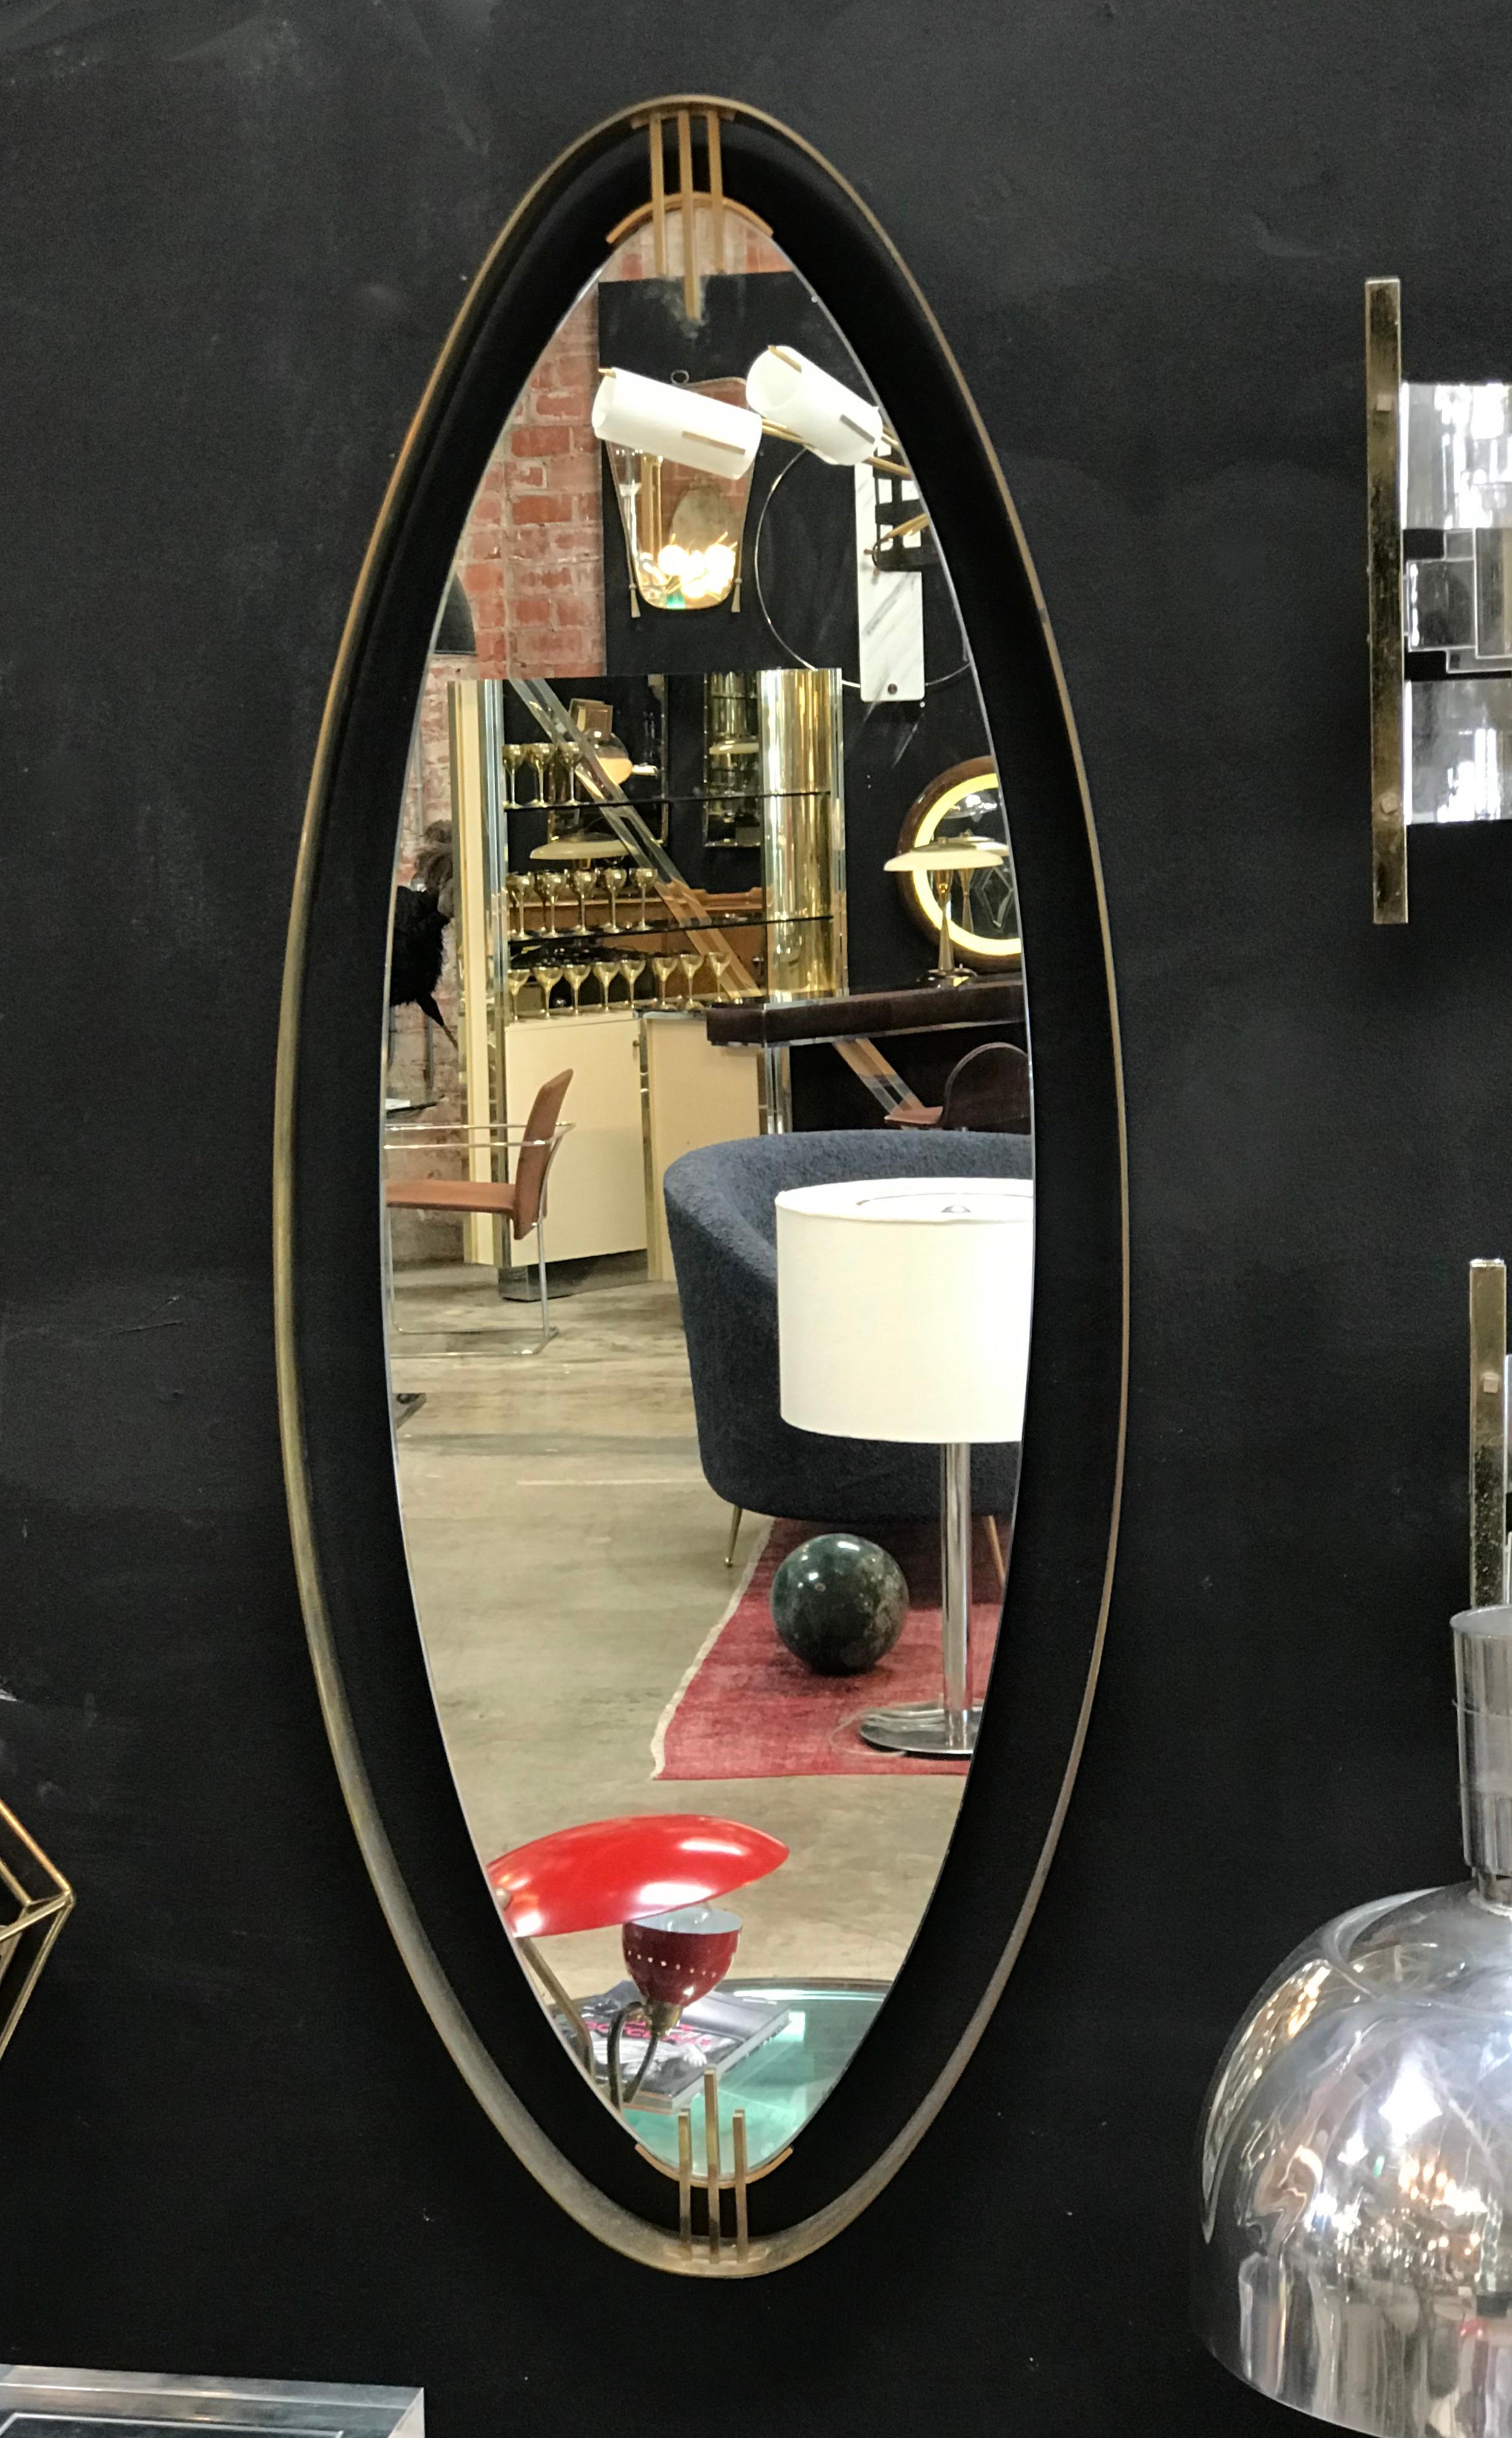 Oval mirror found in Italy features a dark iron, floating-style frame that accentuates the shape and height of this mirror, circa 1970s. Unknown maker.

Actual mirror measures: 37.5” high x 12.5” wide.